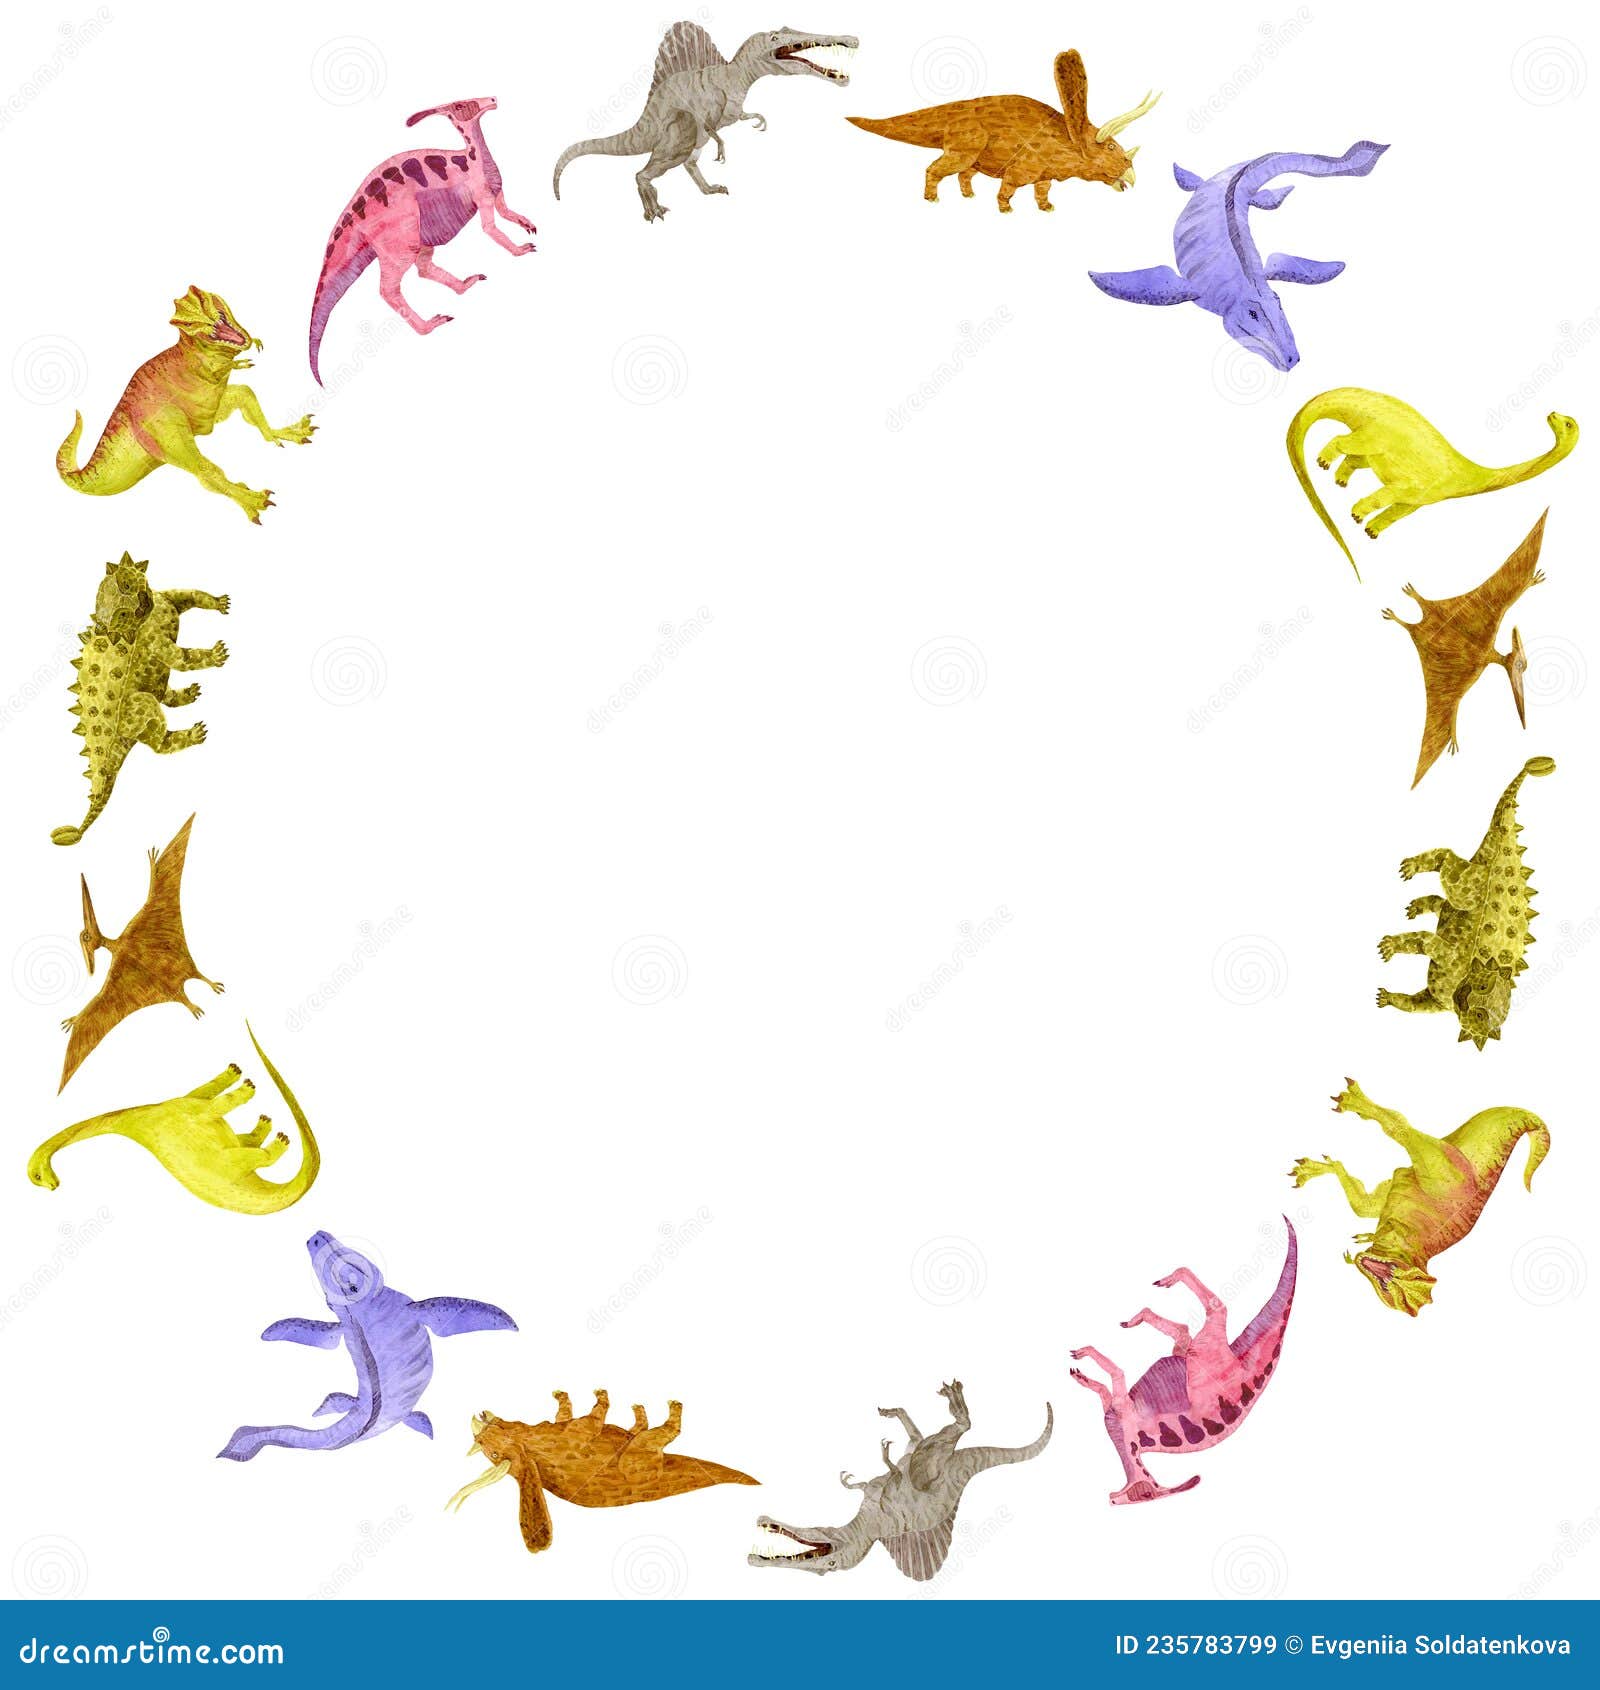 Pteranodon Pterodactyl Dinosaur on white background 8843960 PNG